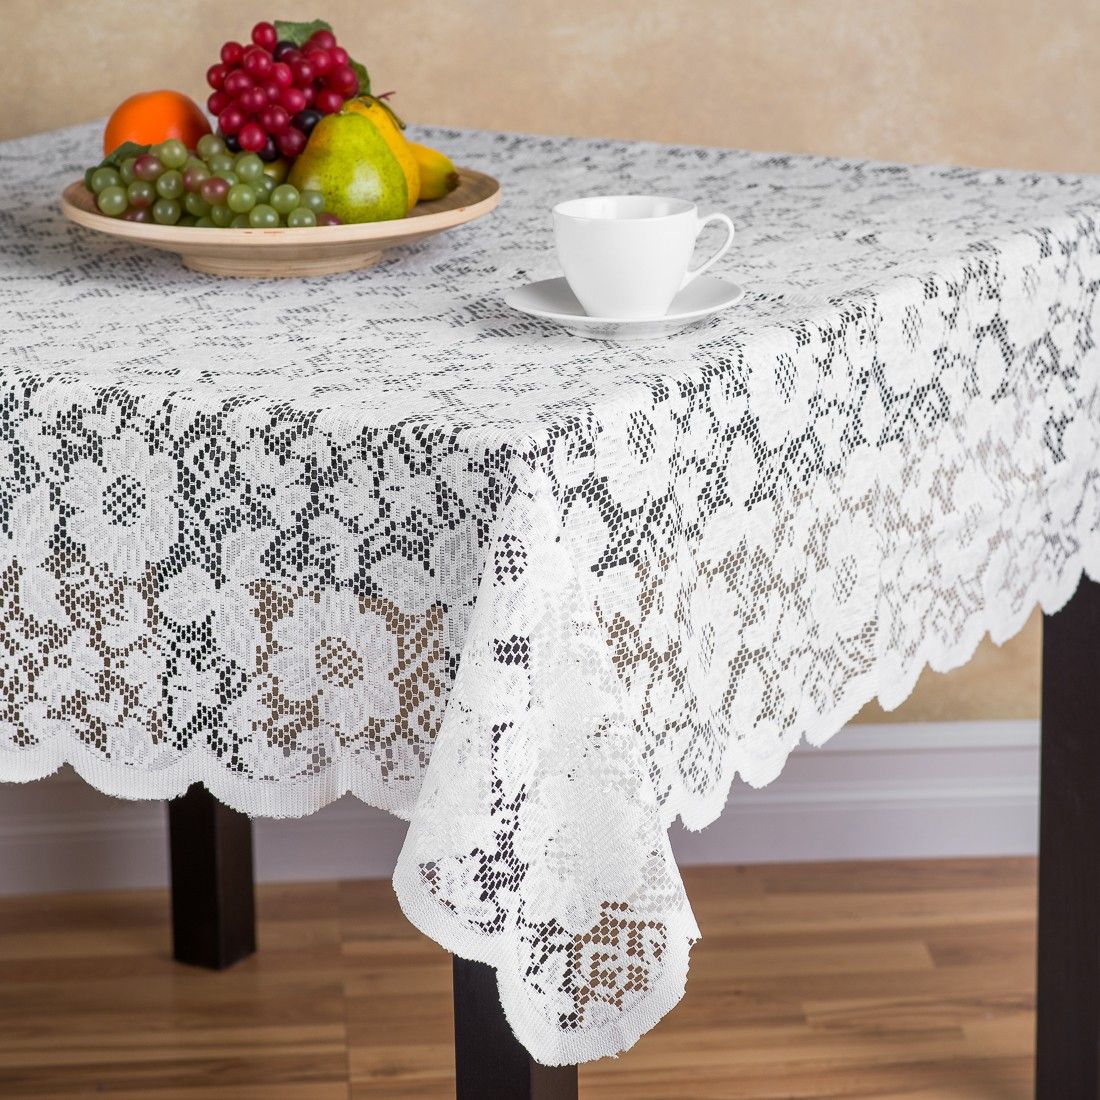 HERITAGE LACE IVORY FLOWERS TABLECLOTH 54WX77L ITEM 4099 